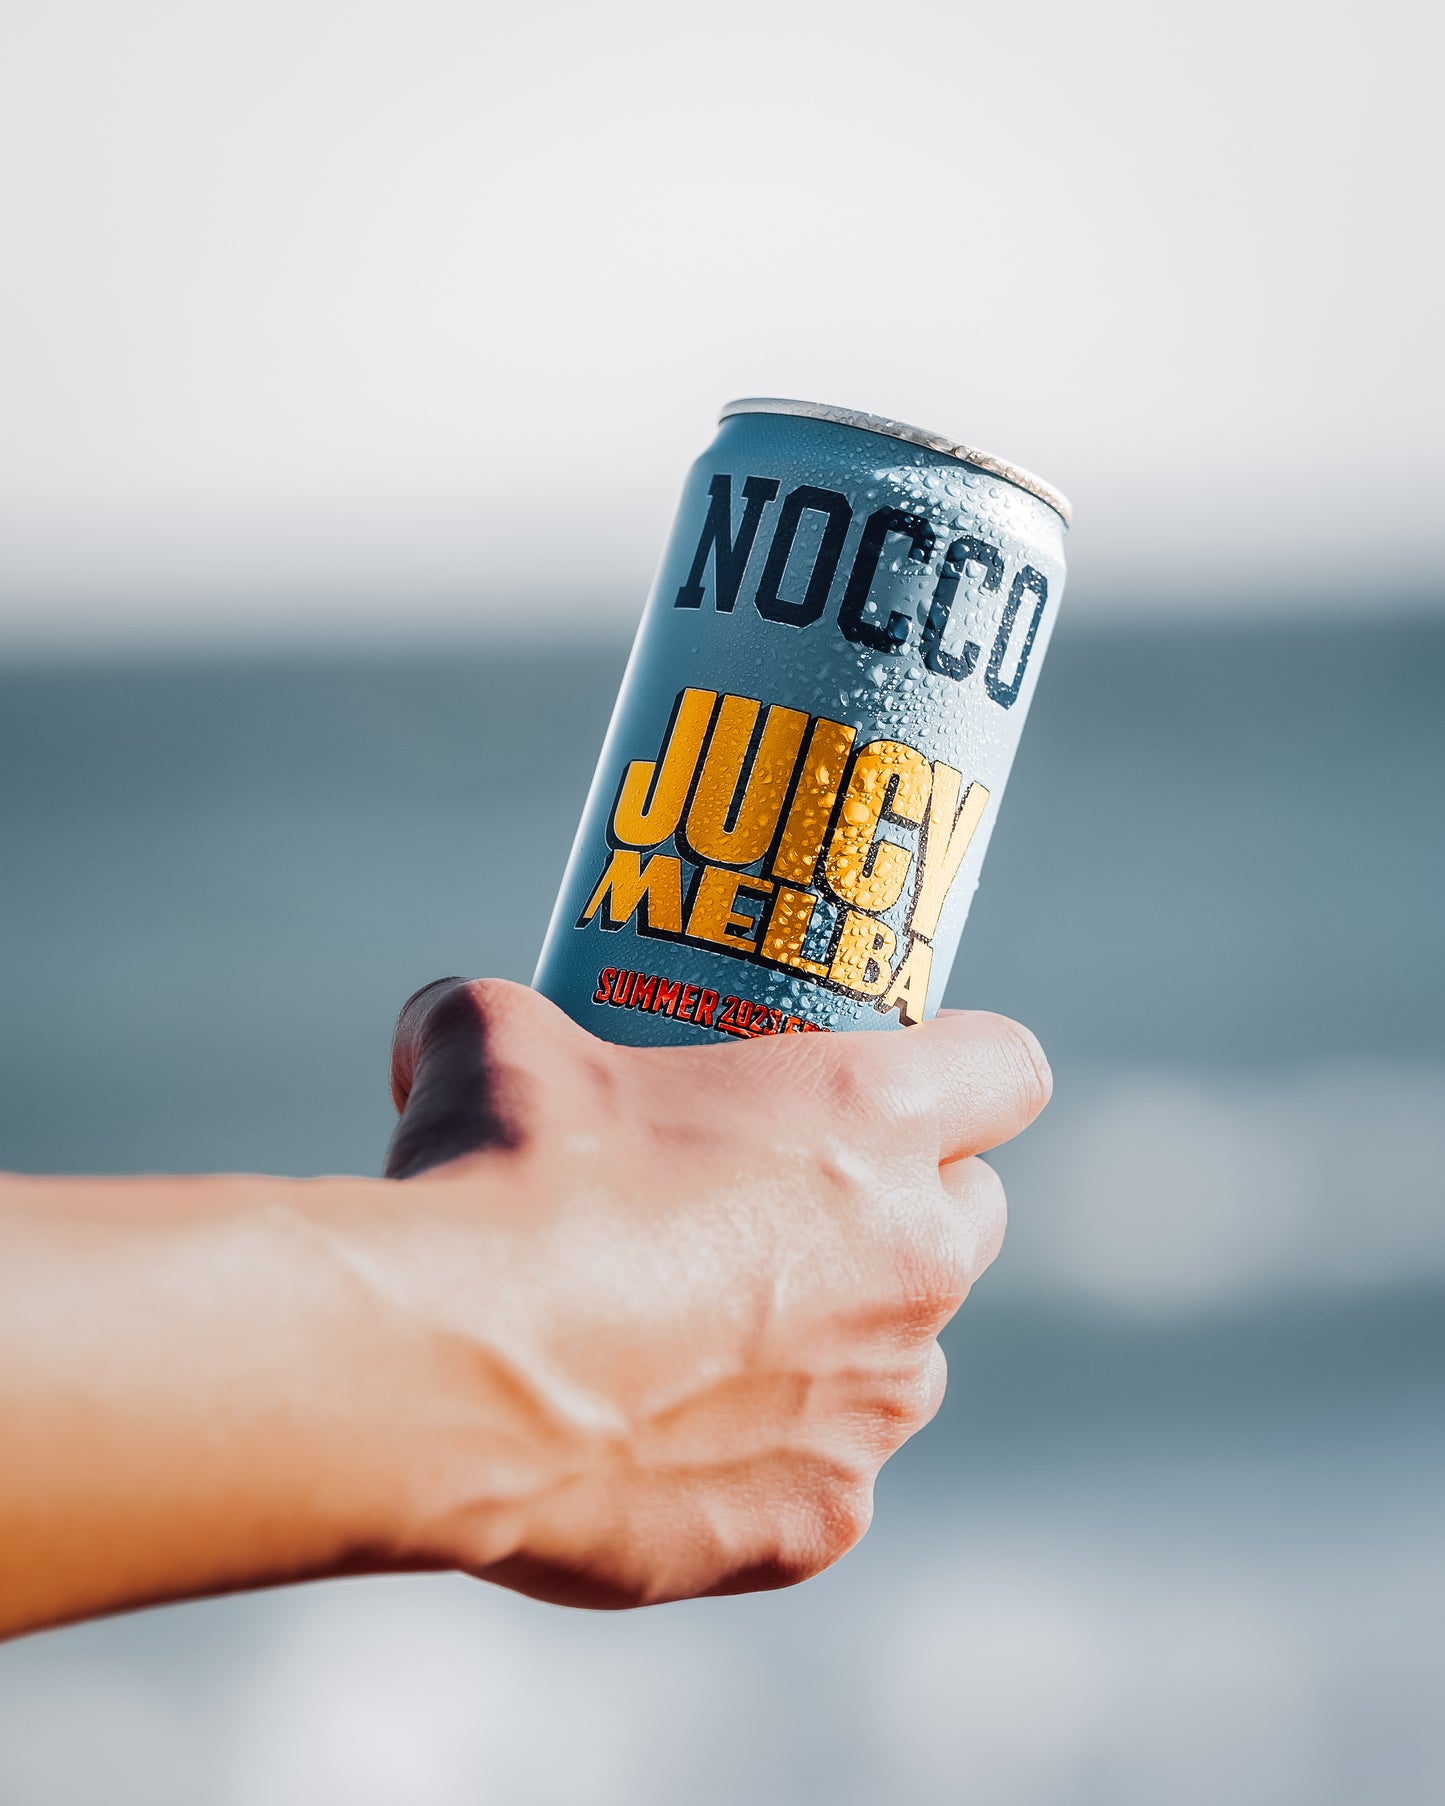 NOCCO BCAA Multi-vitamins Performance Drink - JUICY MELBA (Caffeinated) 1 Can